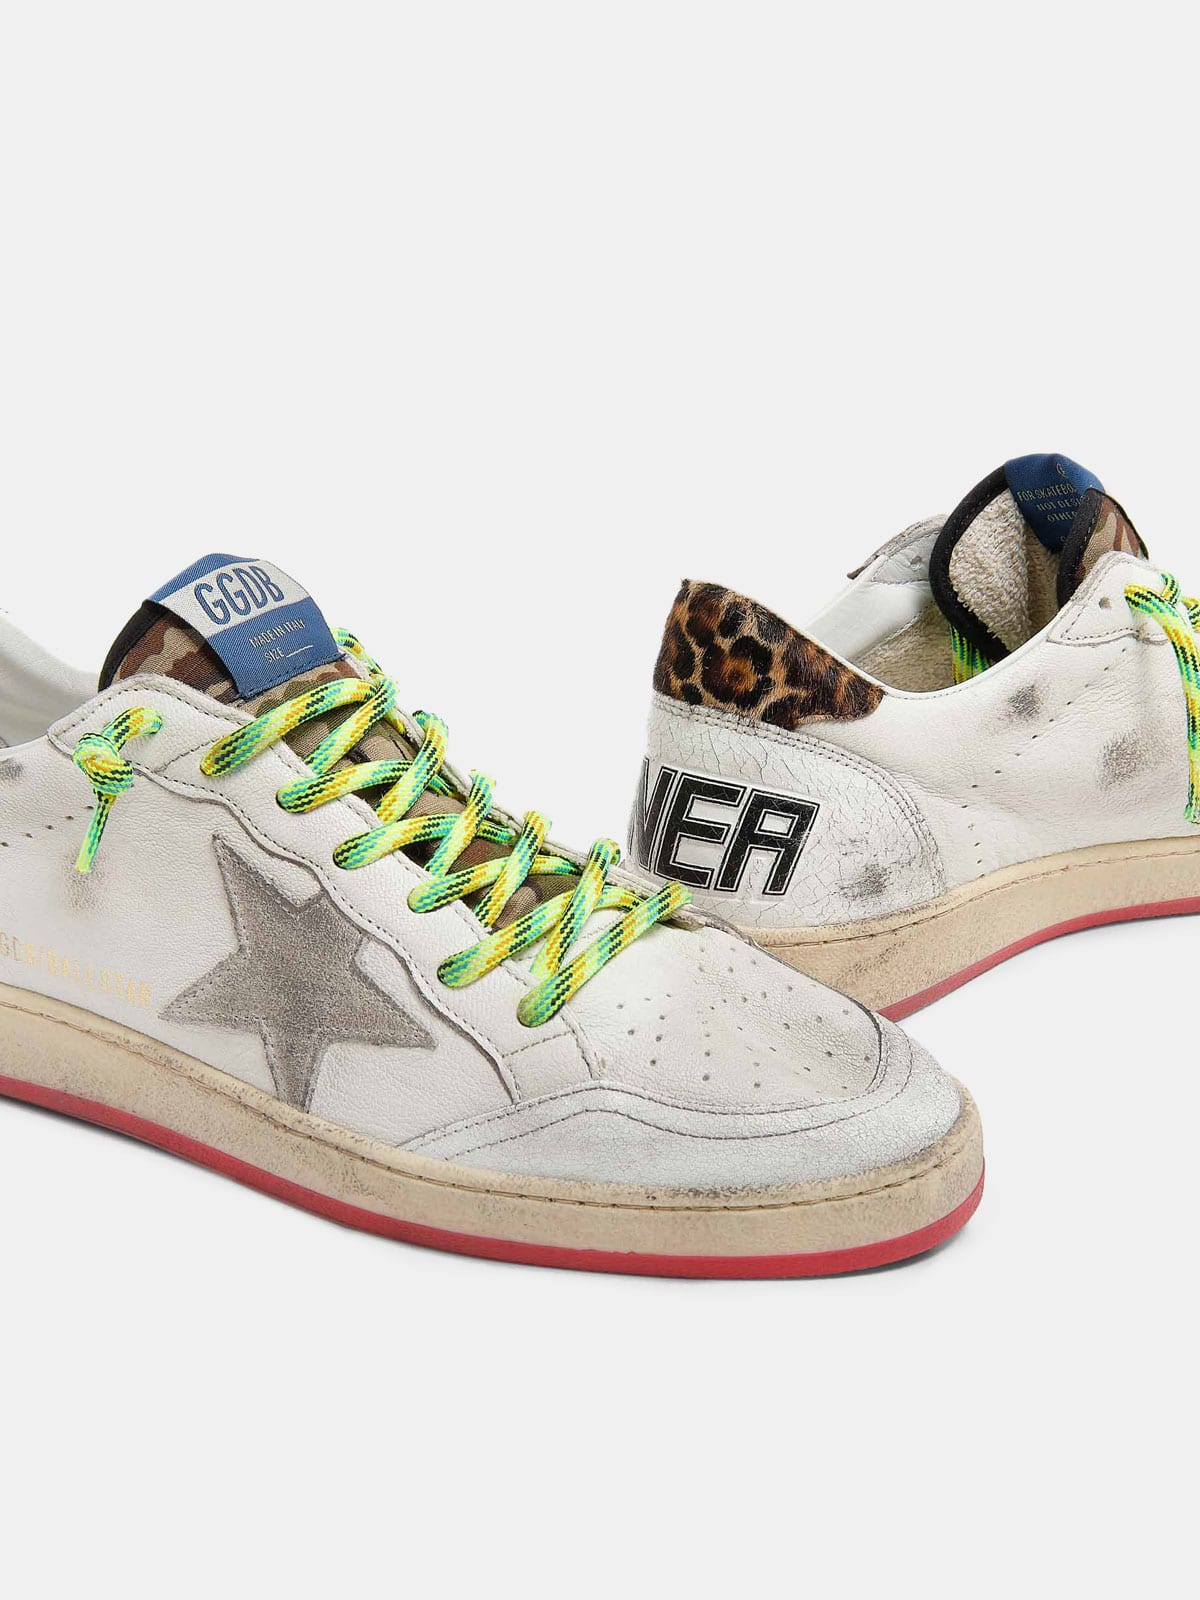 Golden Goose Ball Star leather sneakers - Yellow